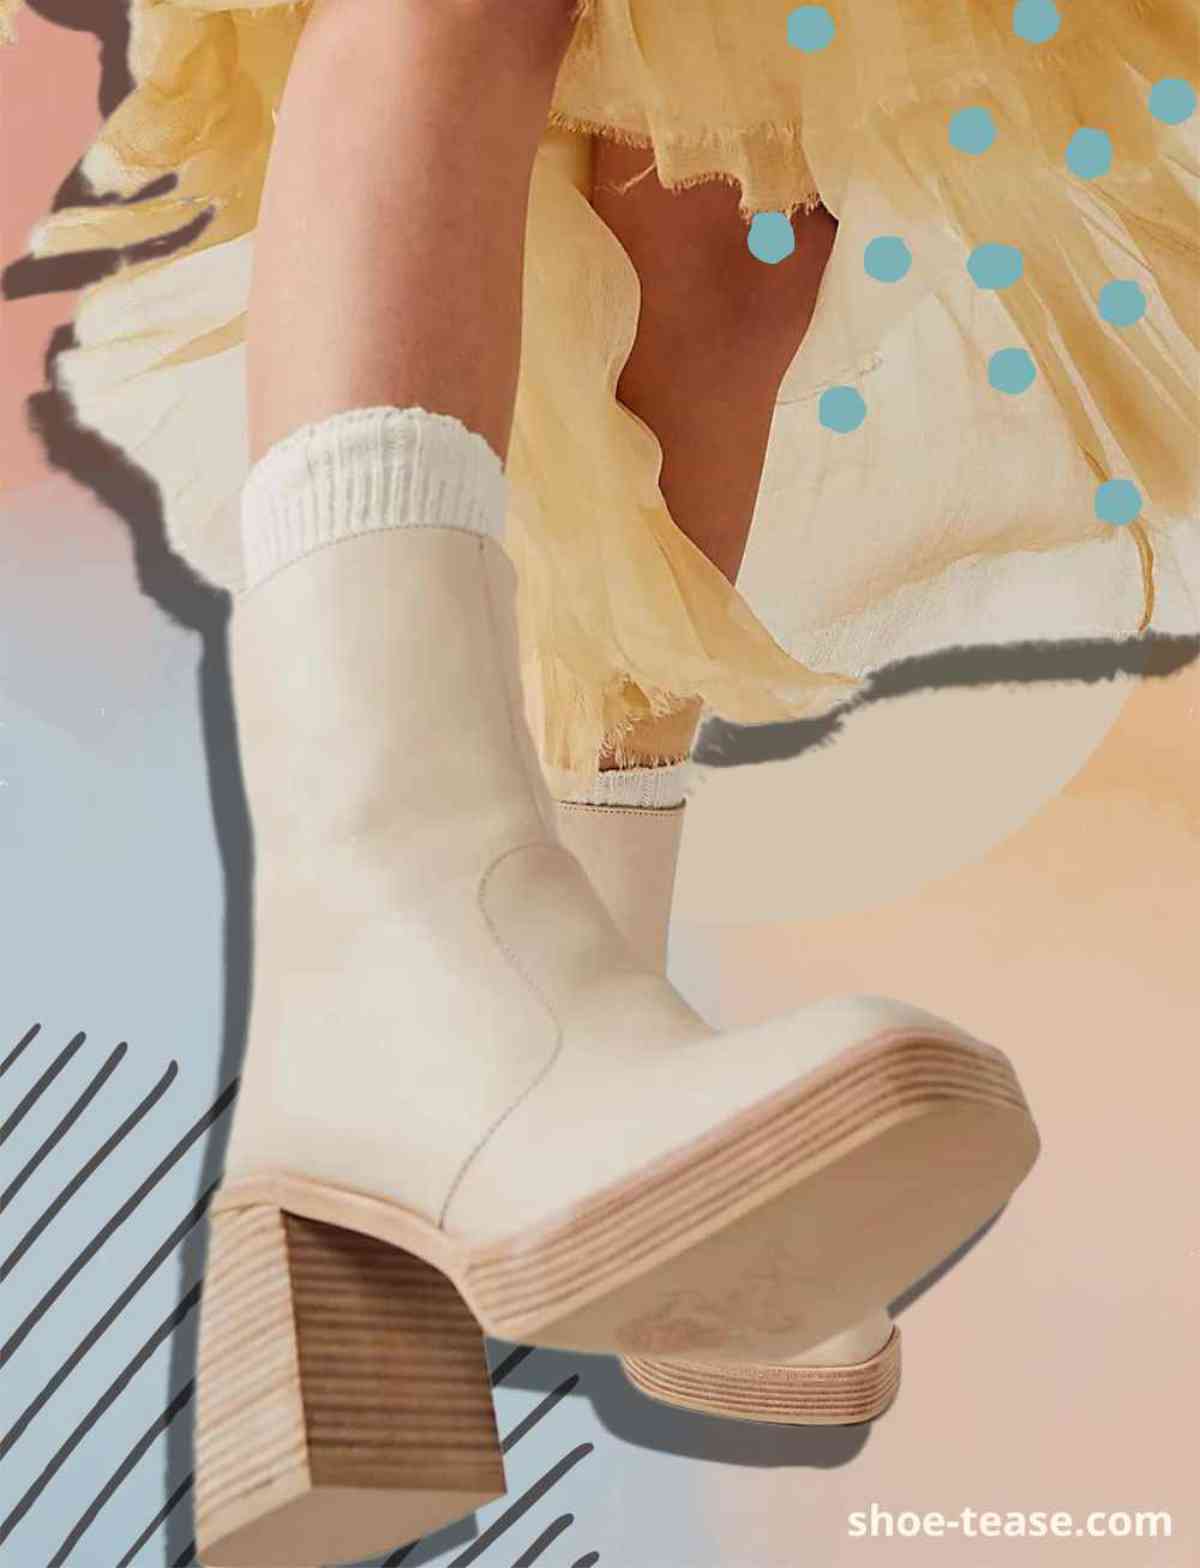 verraad uitlaat spelen How to Wear Socks with Ankle Boots: 9 Best Socks for Ankle Boots